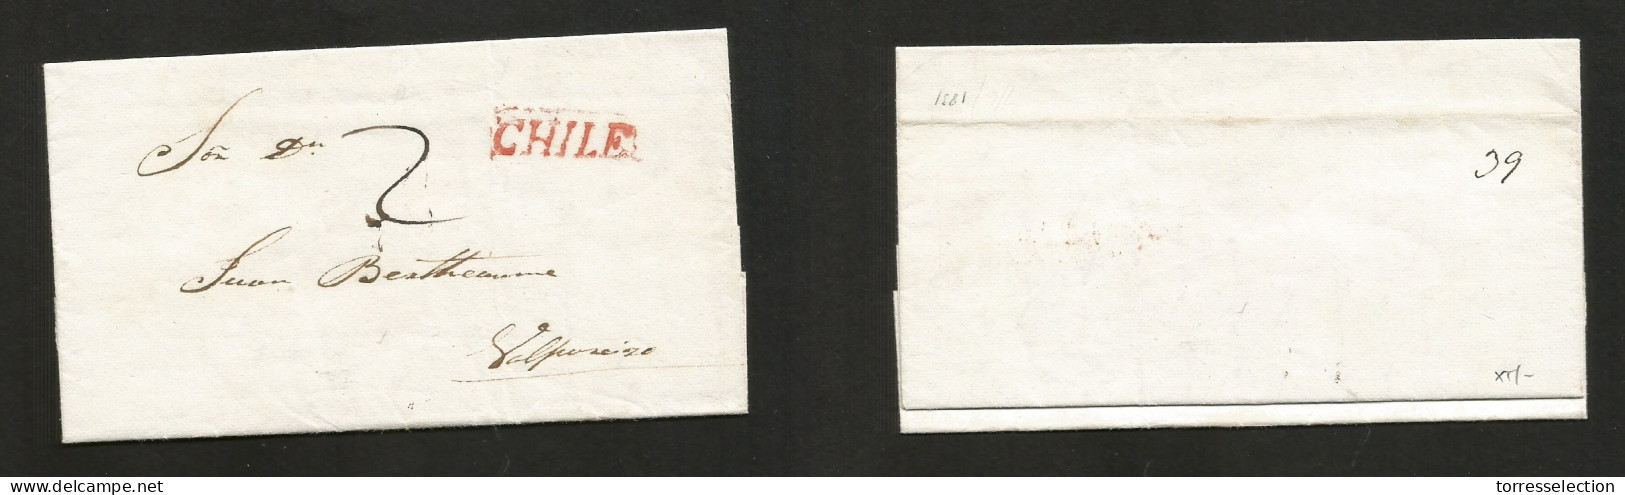 CHILE. 1831 (7 June) Stgo - Valp. EL With Text, Stline Red CHILE + "2" Mns Charge. VF. SALE. - Cile